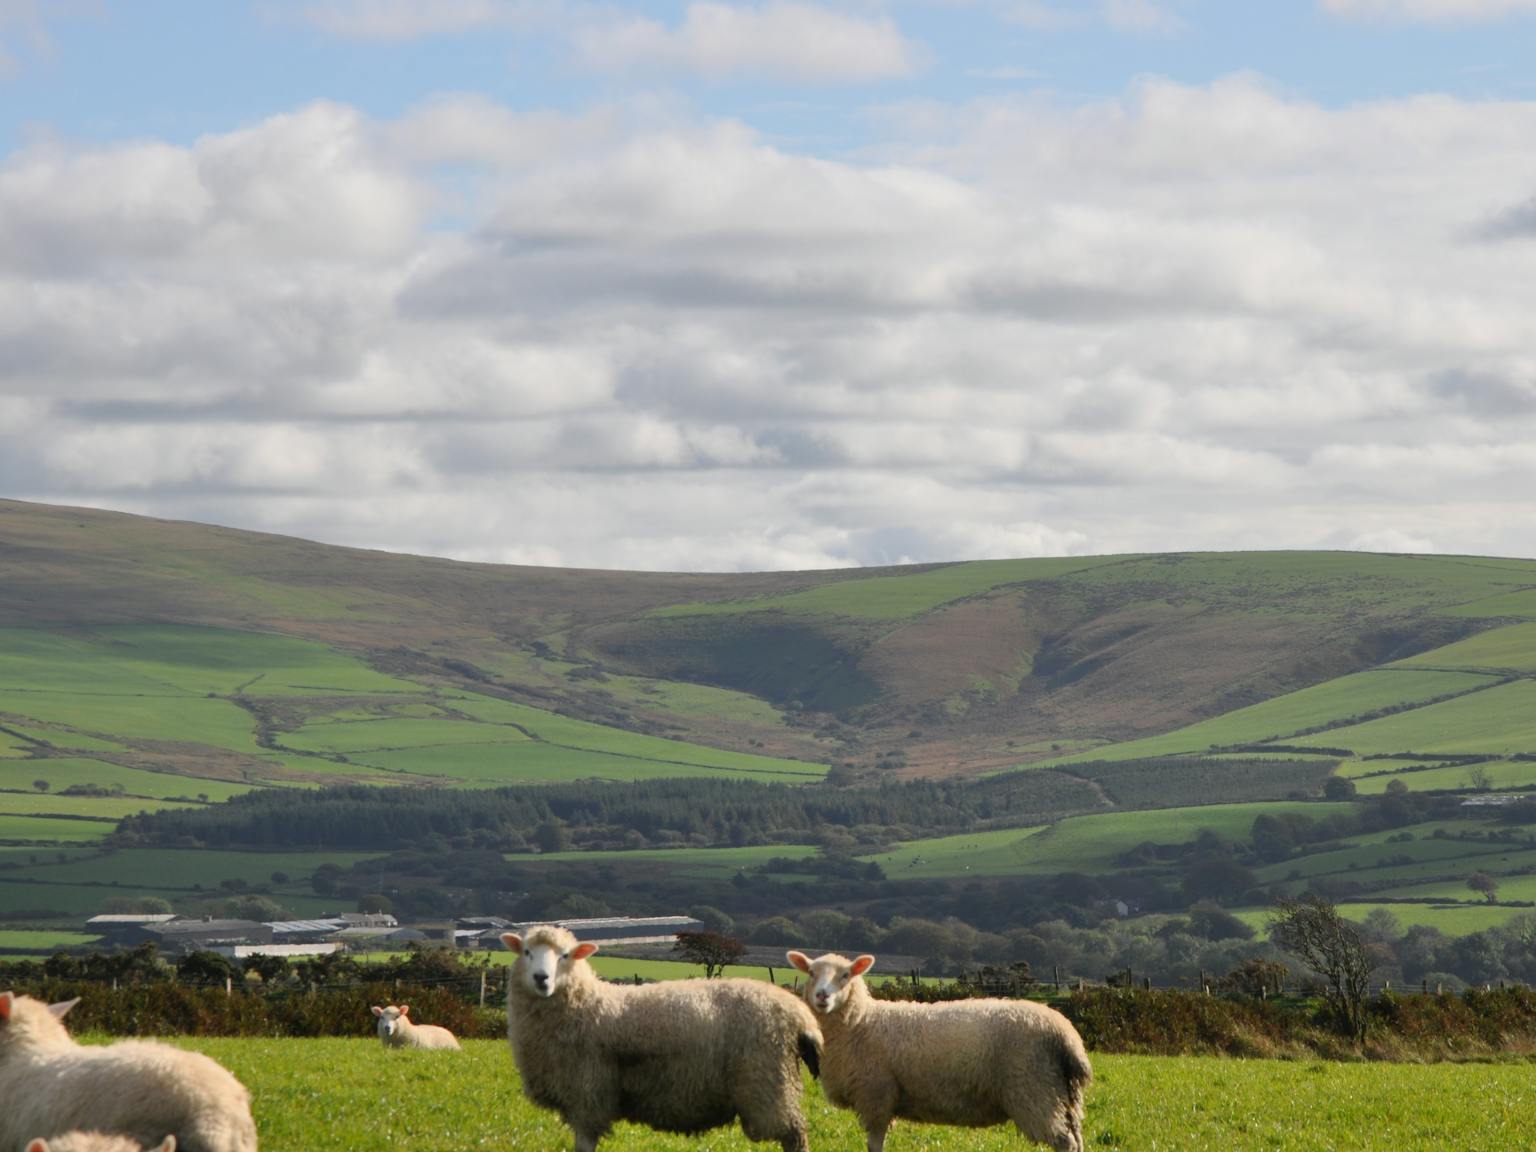 A field with some sheep and hills in the background